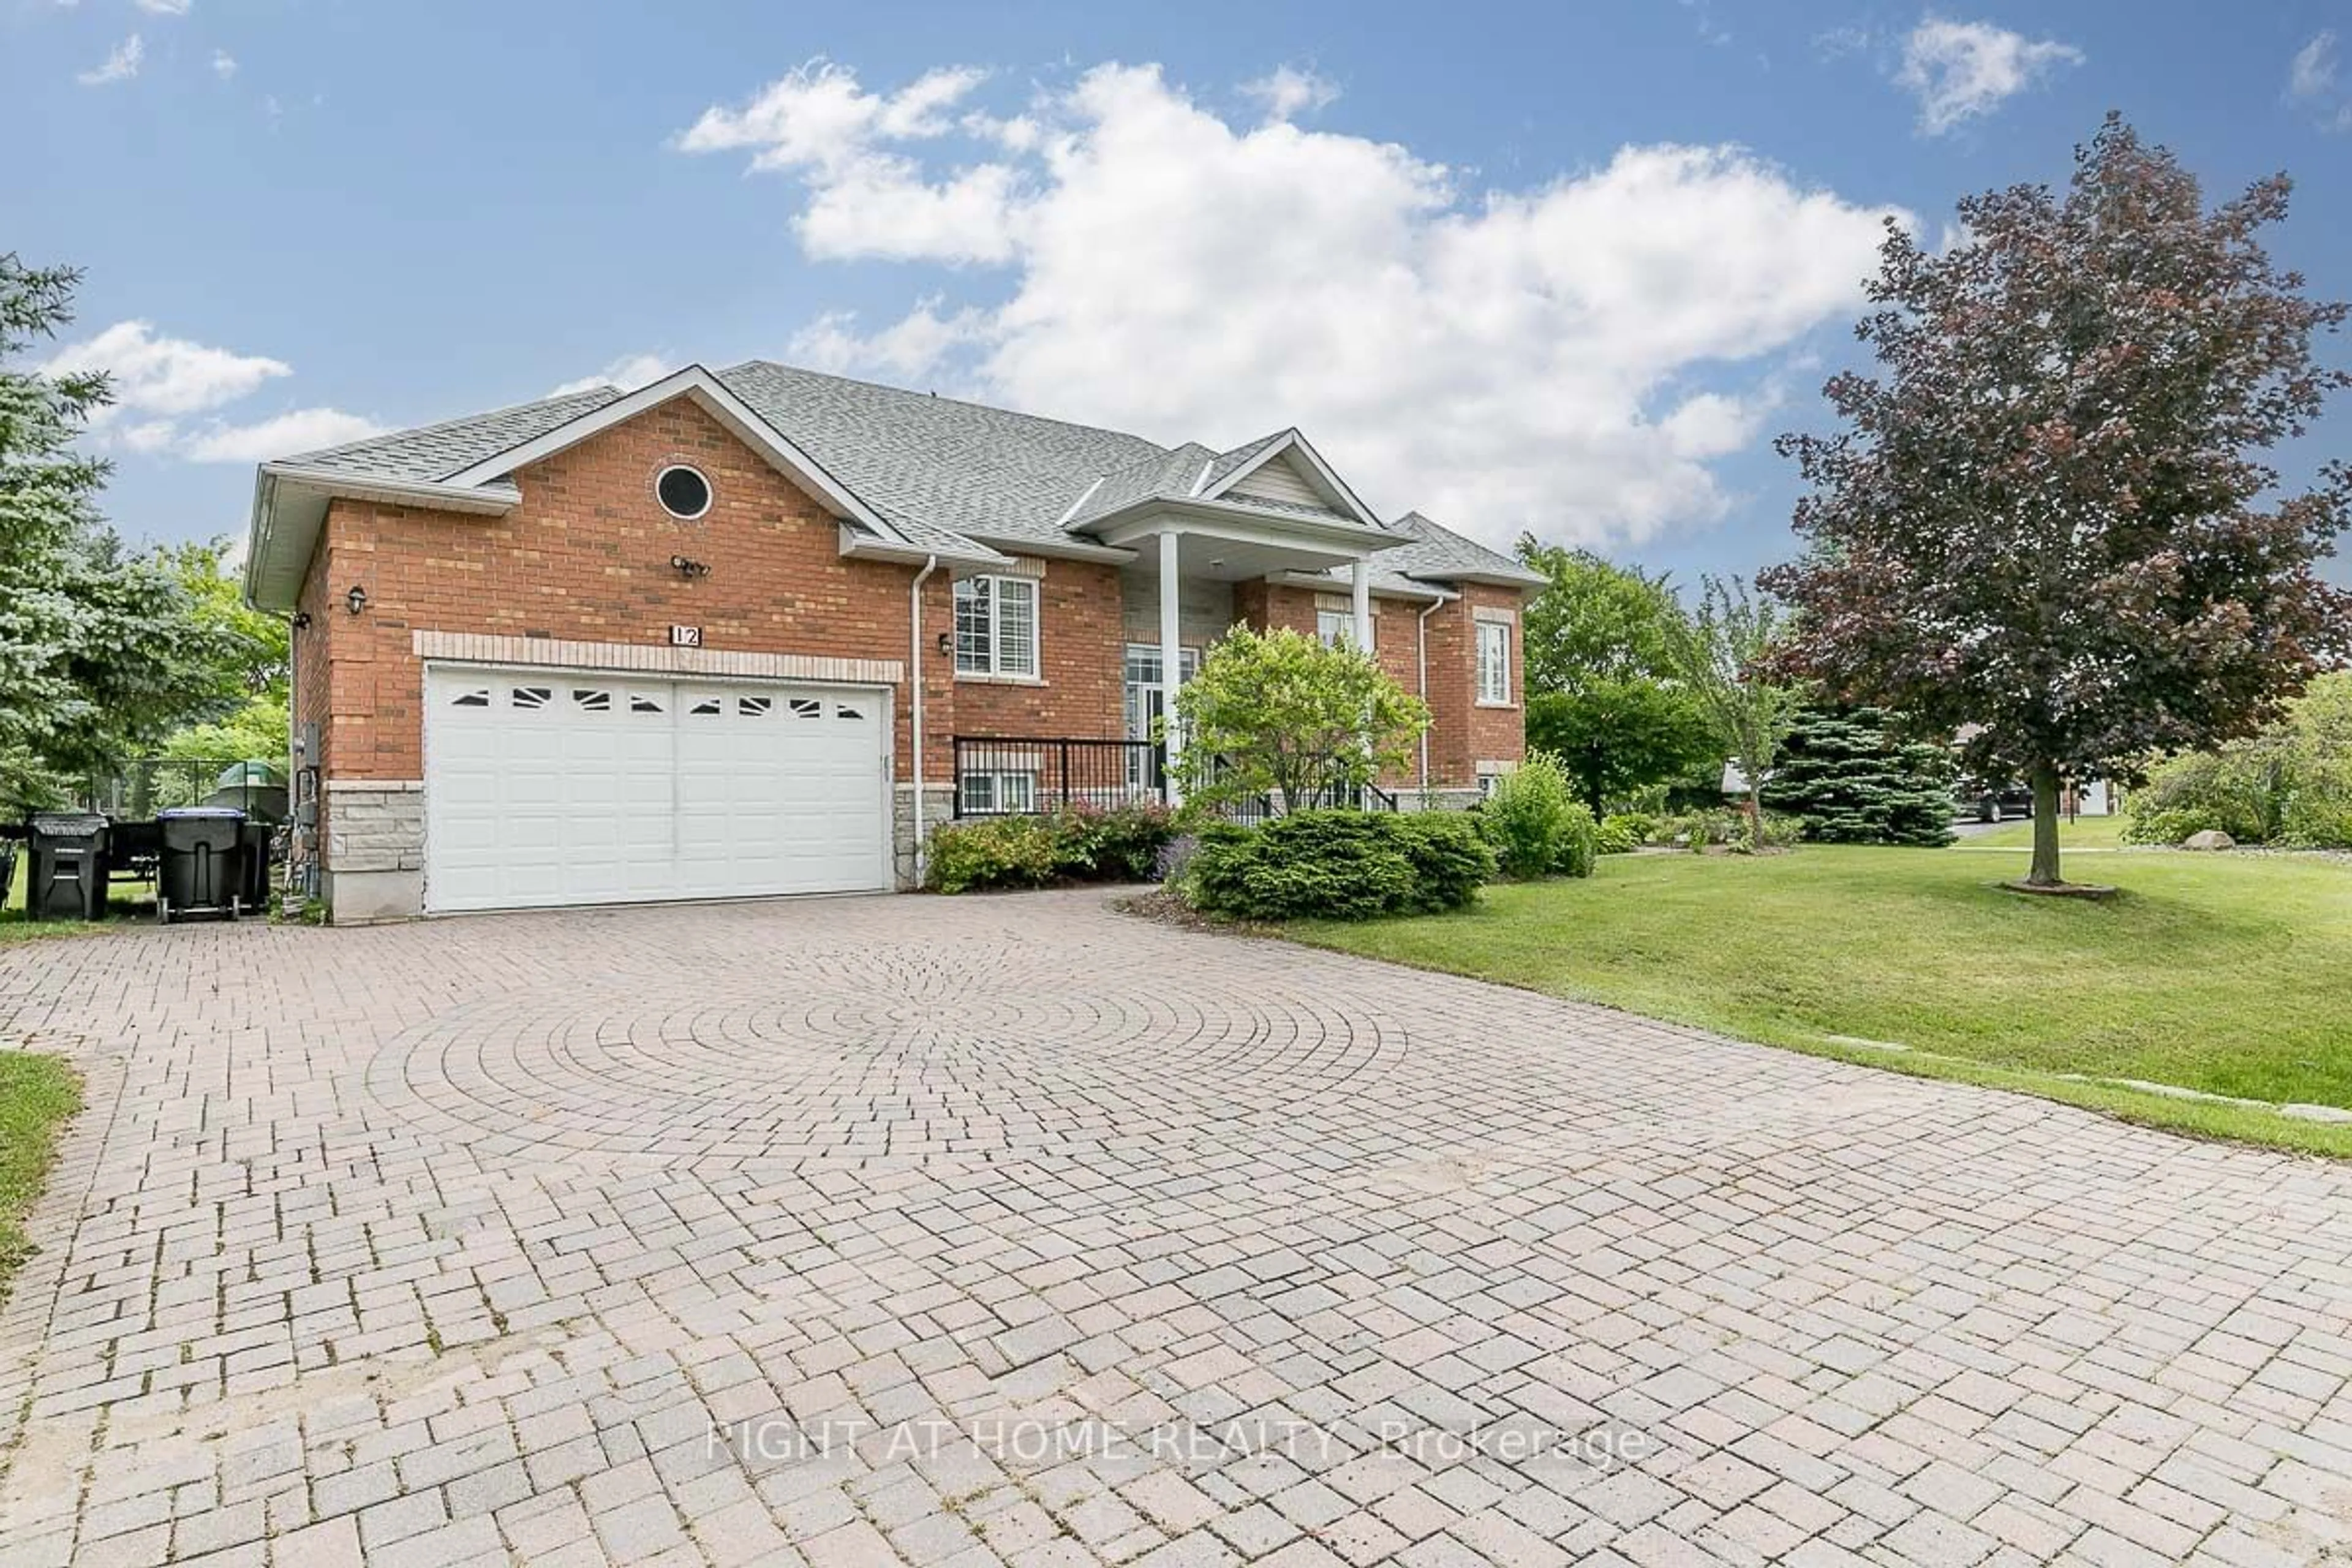 Home with brick exterior material for 12 Wagner Rd, Clearview Ontario L0M 1P0